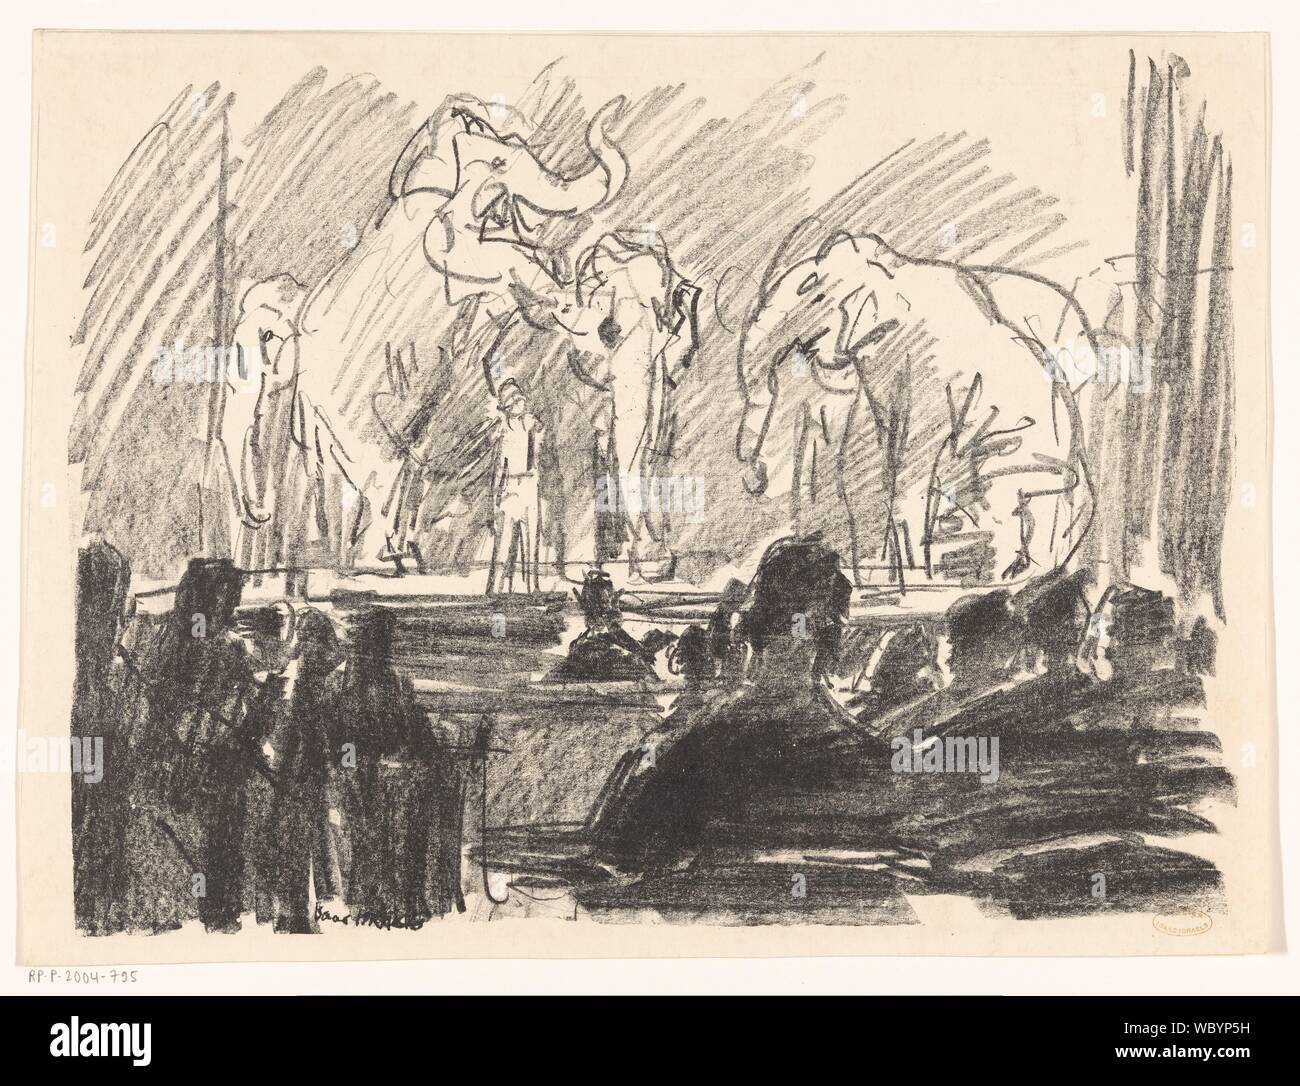 Performance of elephants on a stage, Isaac Israels, 1875 - 1934.jpg - WBYP5H Stock Photo